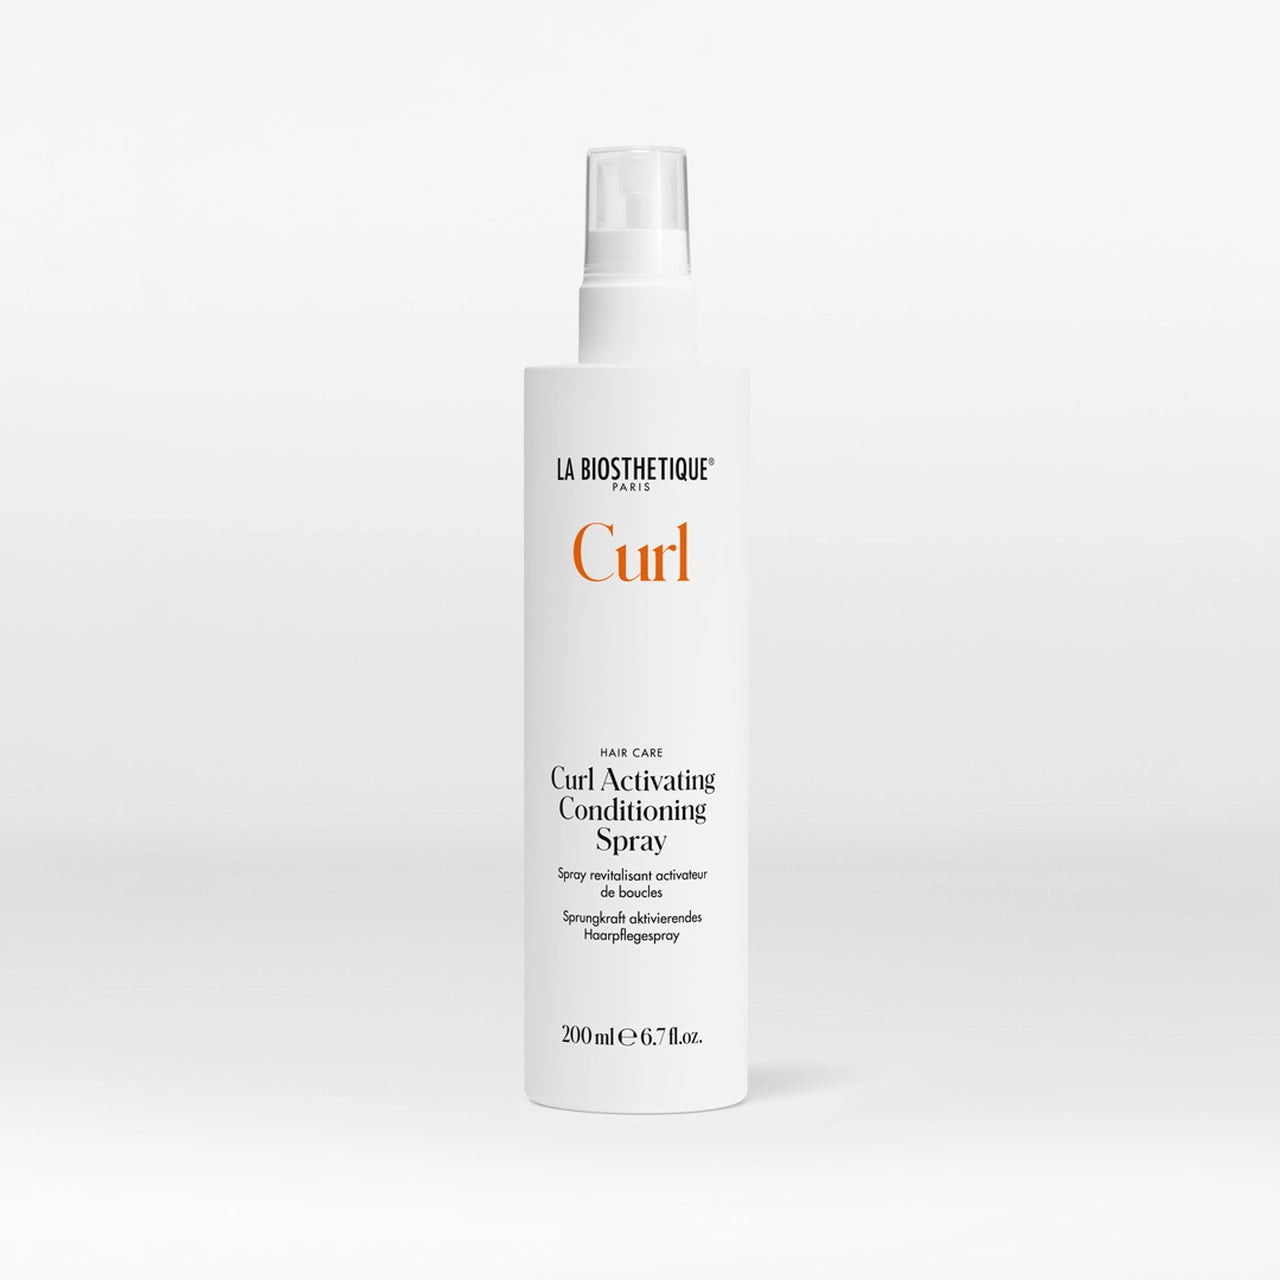 La Biosthetique's Curl Activating Conditioning Spray - for curly hair and styling